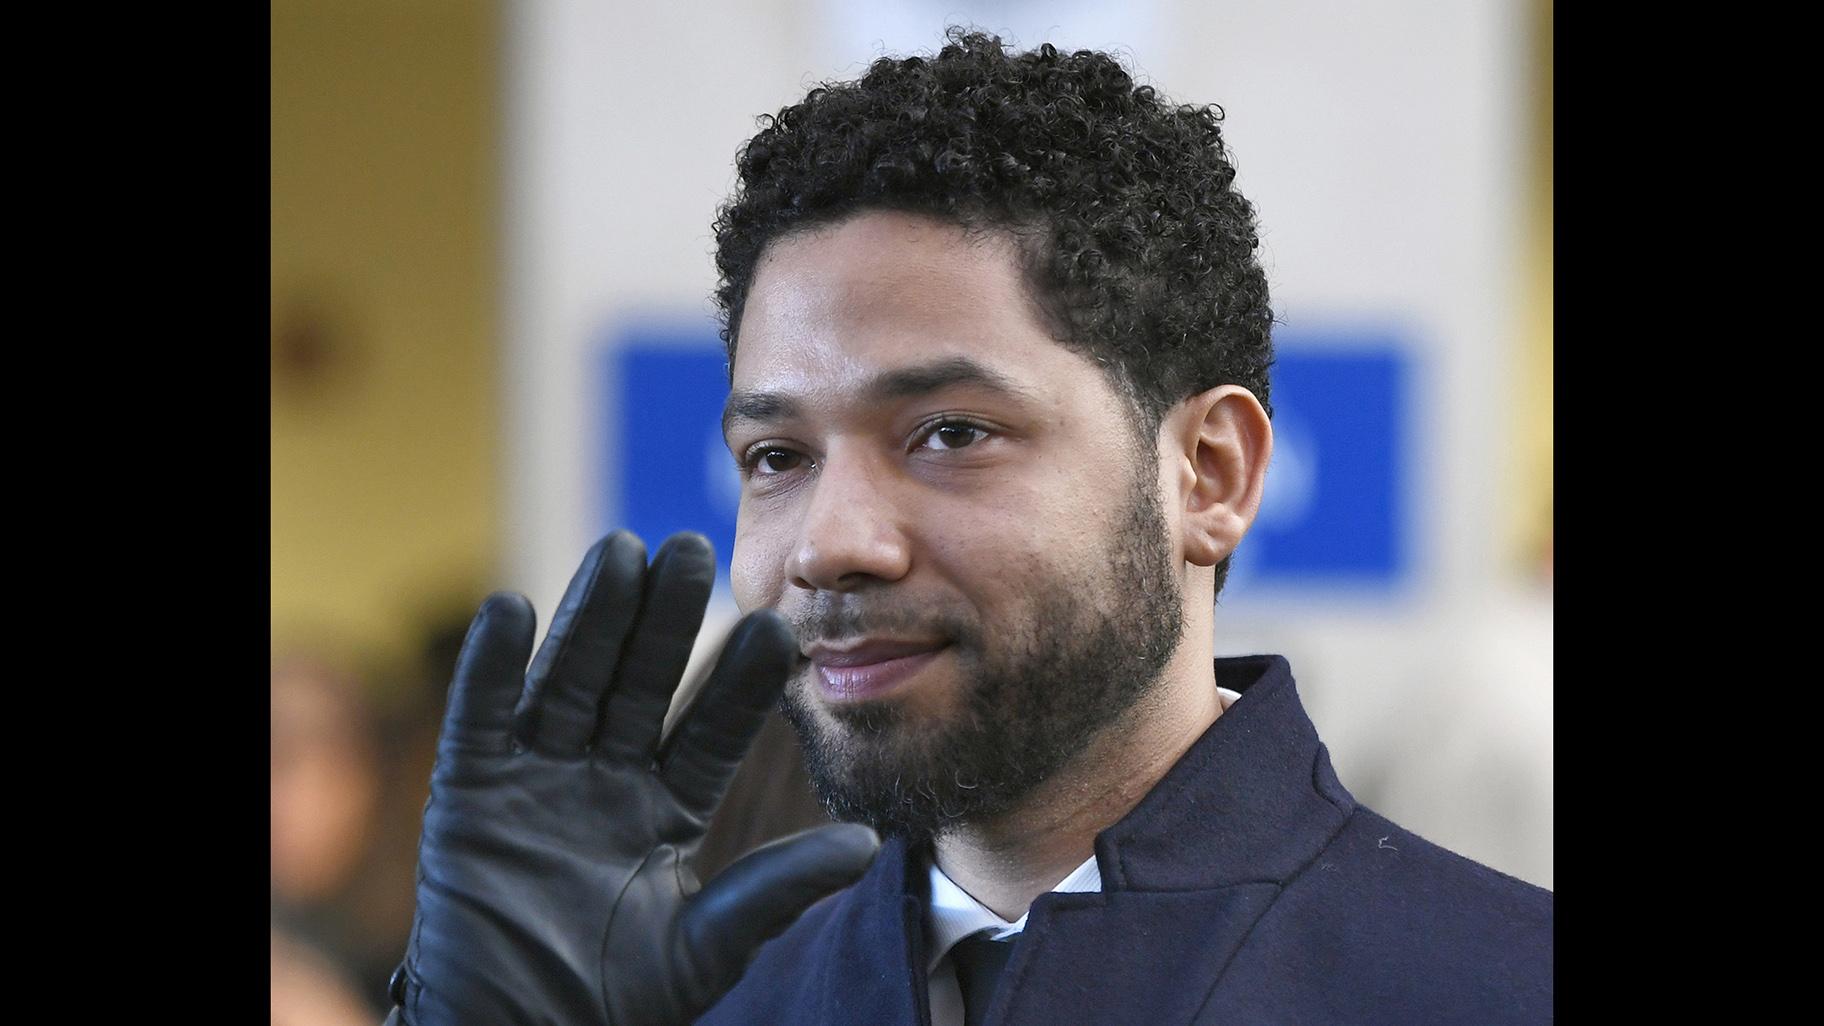 In this March 26, 2019, file photo, actor Jussie Smollett smiles and waves to supporters before leaving Cook County Court. (AP Photo / Paul Beaty, File)